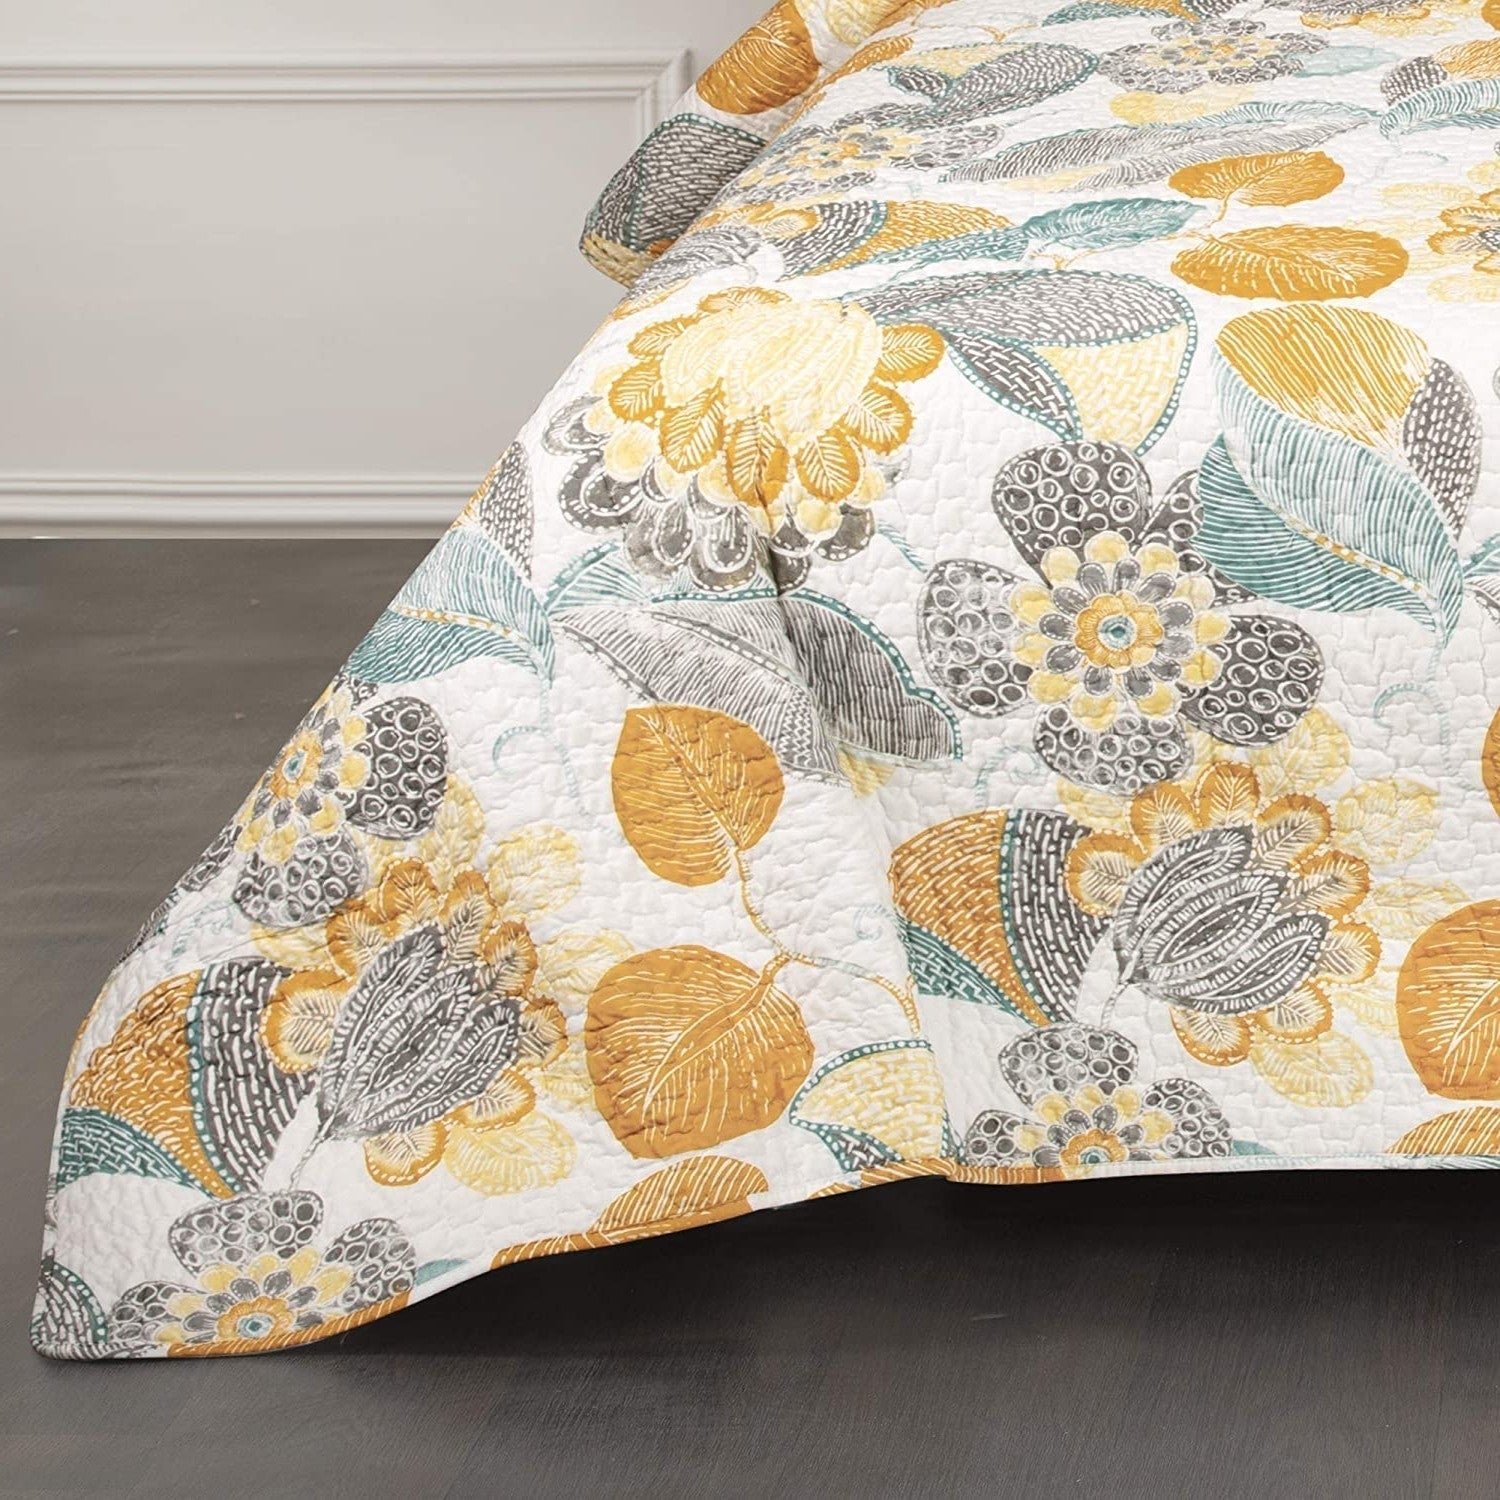 Bedroom > Quilts & Blankets - Full/Queen 3 Piece Reversible Yellow Grey Teal Floral Leaves Cotton Quilt Set